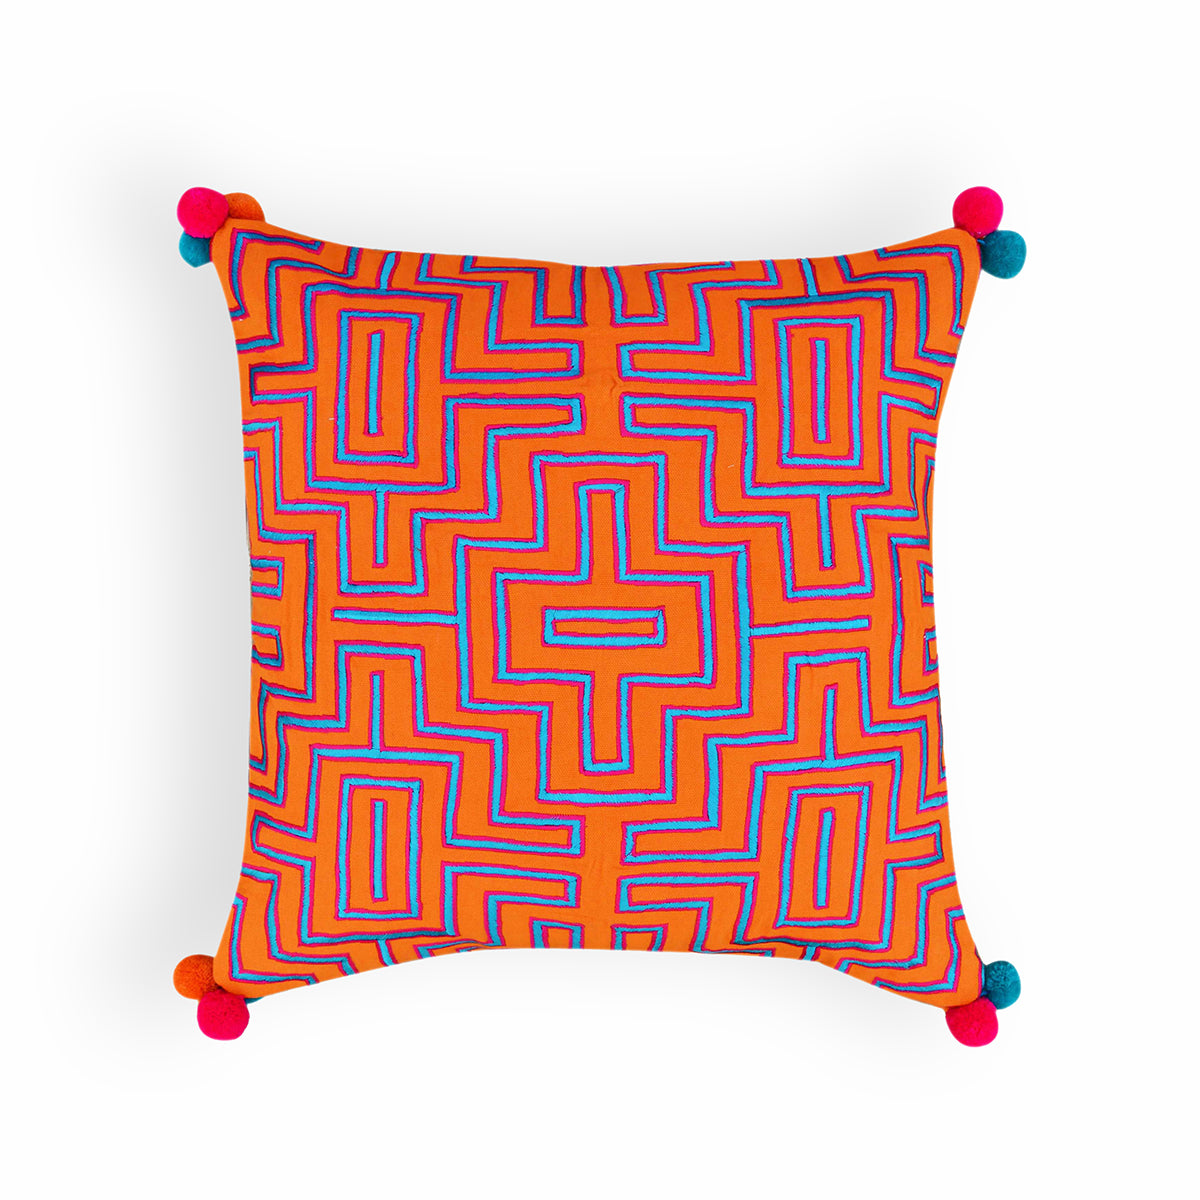 Mola -Tangerine pillow cover, embroidered cushion cover